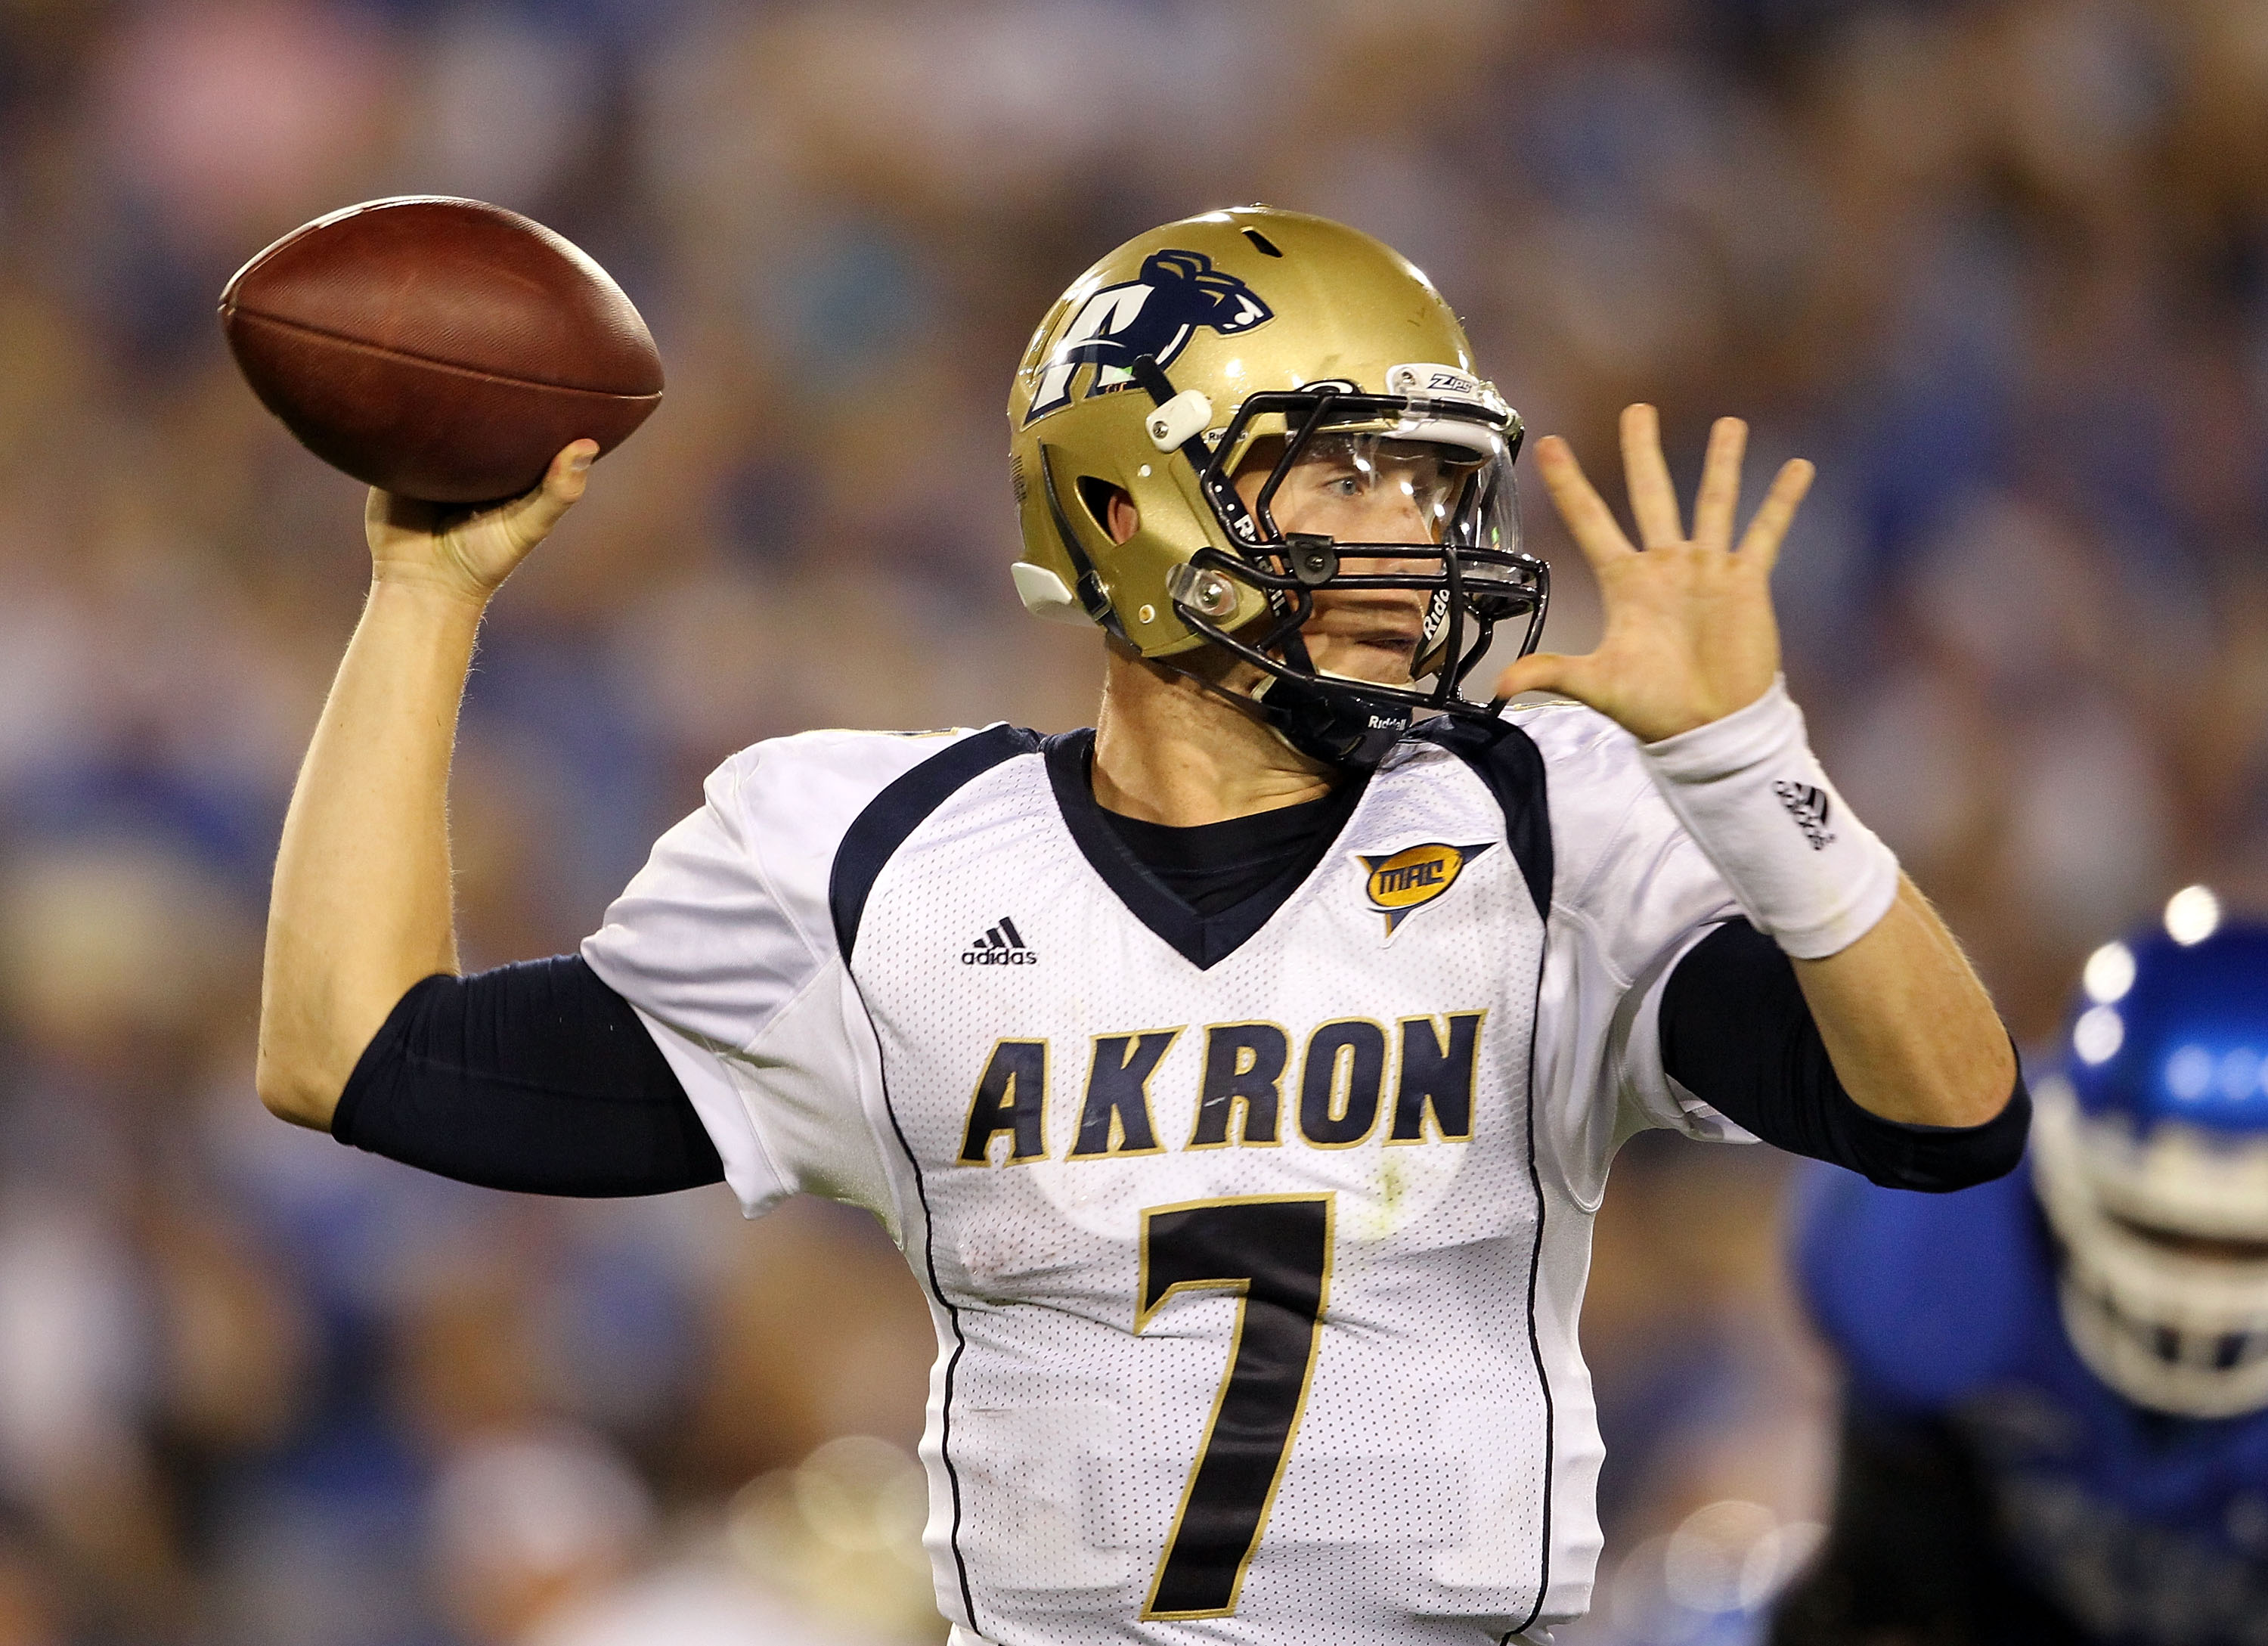 LEXINGTON, KY - SEPTEMBER 18:  Patrick Nicely #7 of the Akron Zips throws the ball during the game against the Kentucky Wildcats at Commonwealth Stadium on September 18, 2010 in Lexington, Kentucky.  (Photo by Andy Lyons/Getty Images)